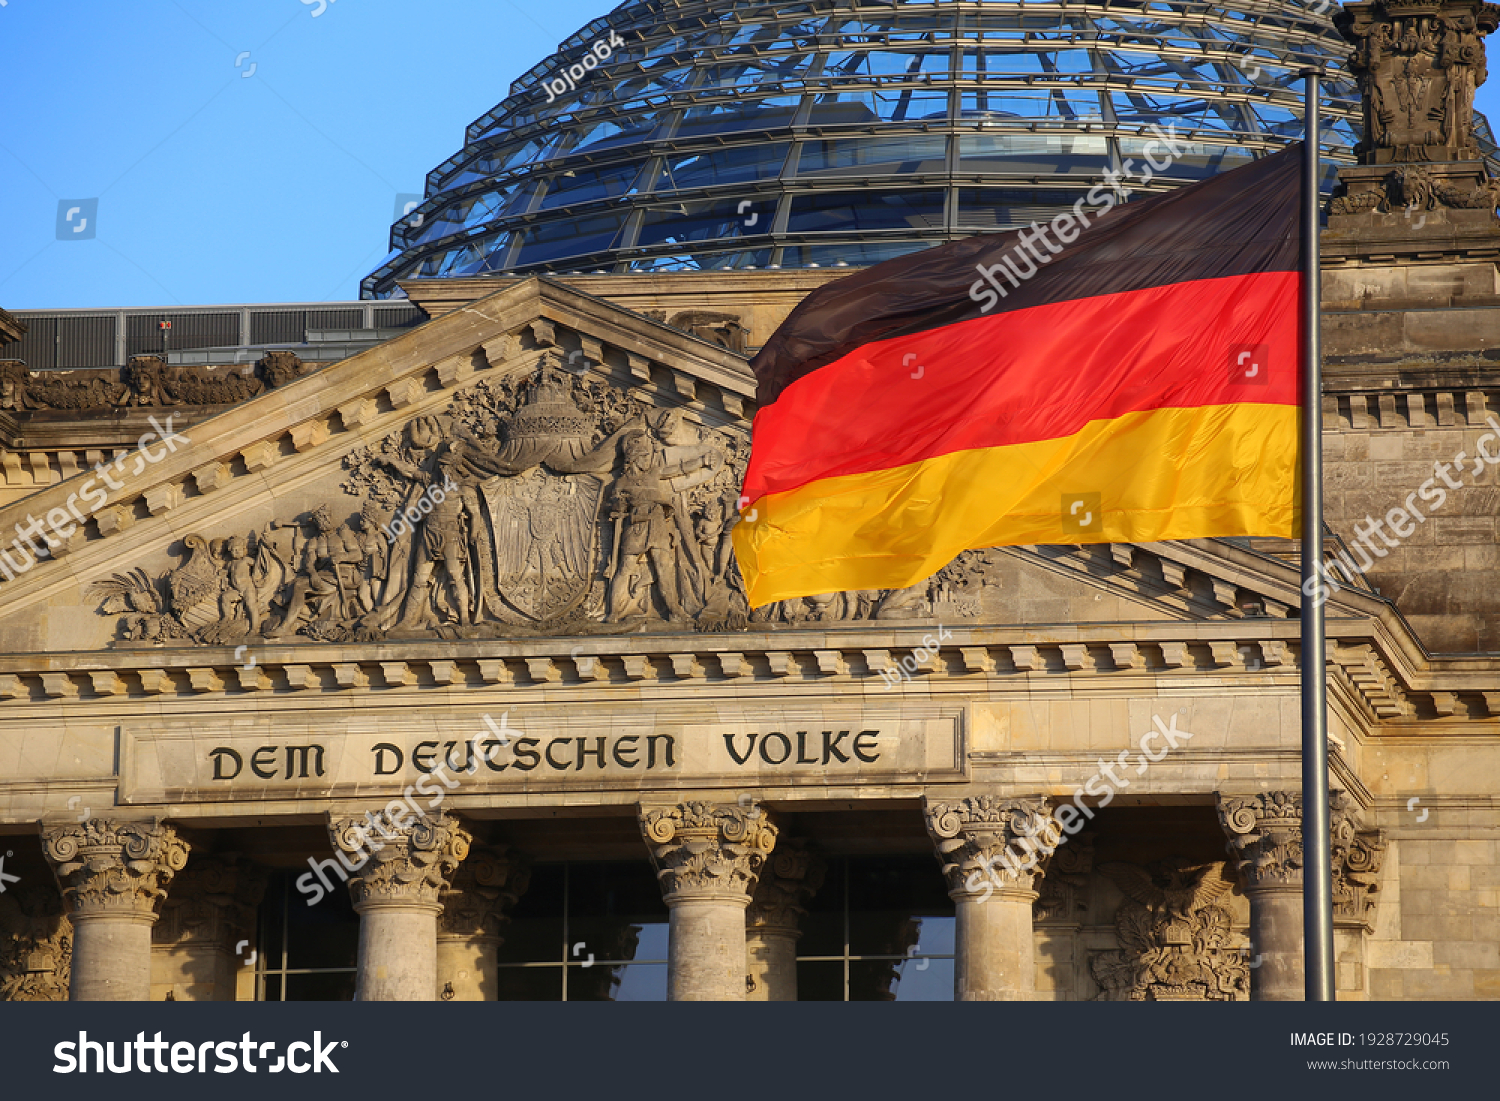 The German flag in front of the Reichstag building in Berlin. The inscription says: Dem Deutschen Volke - To the German people. #1928729045